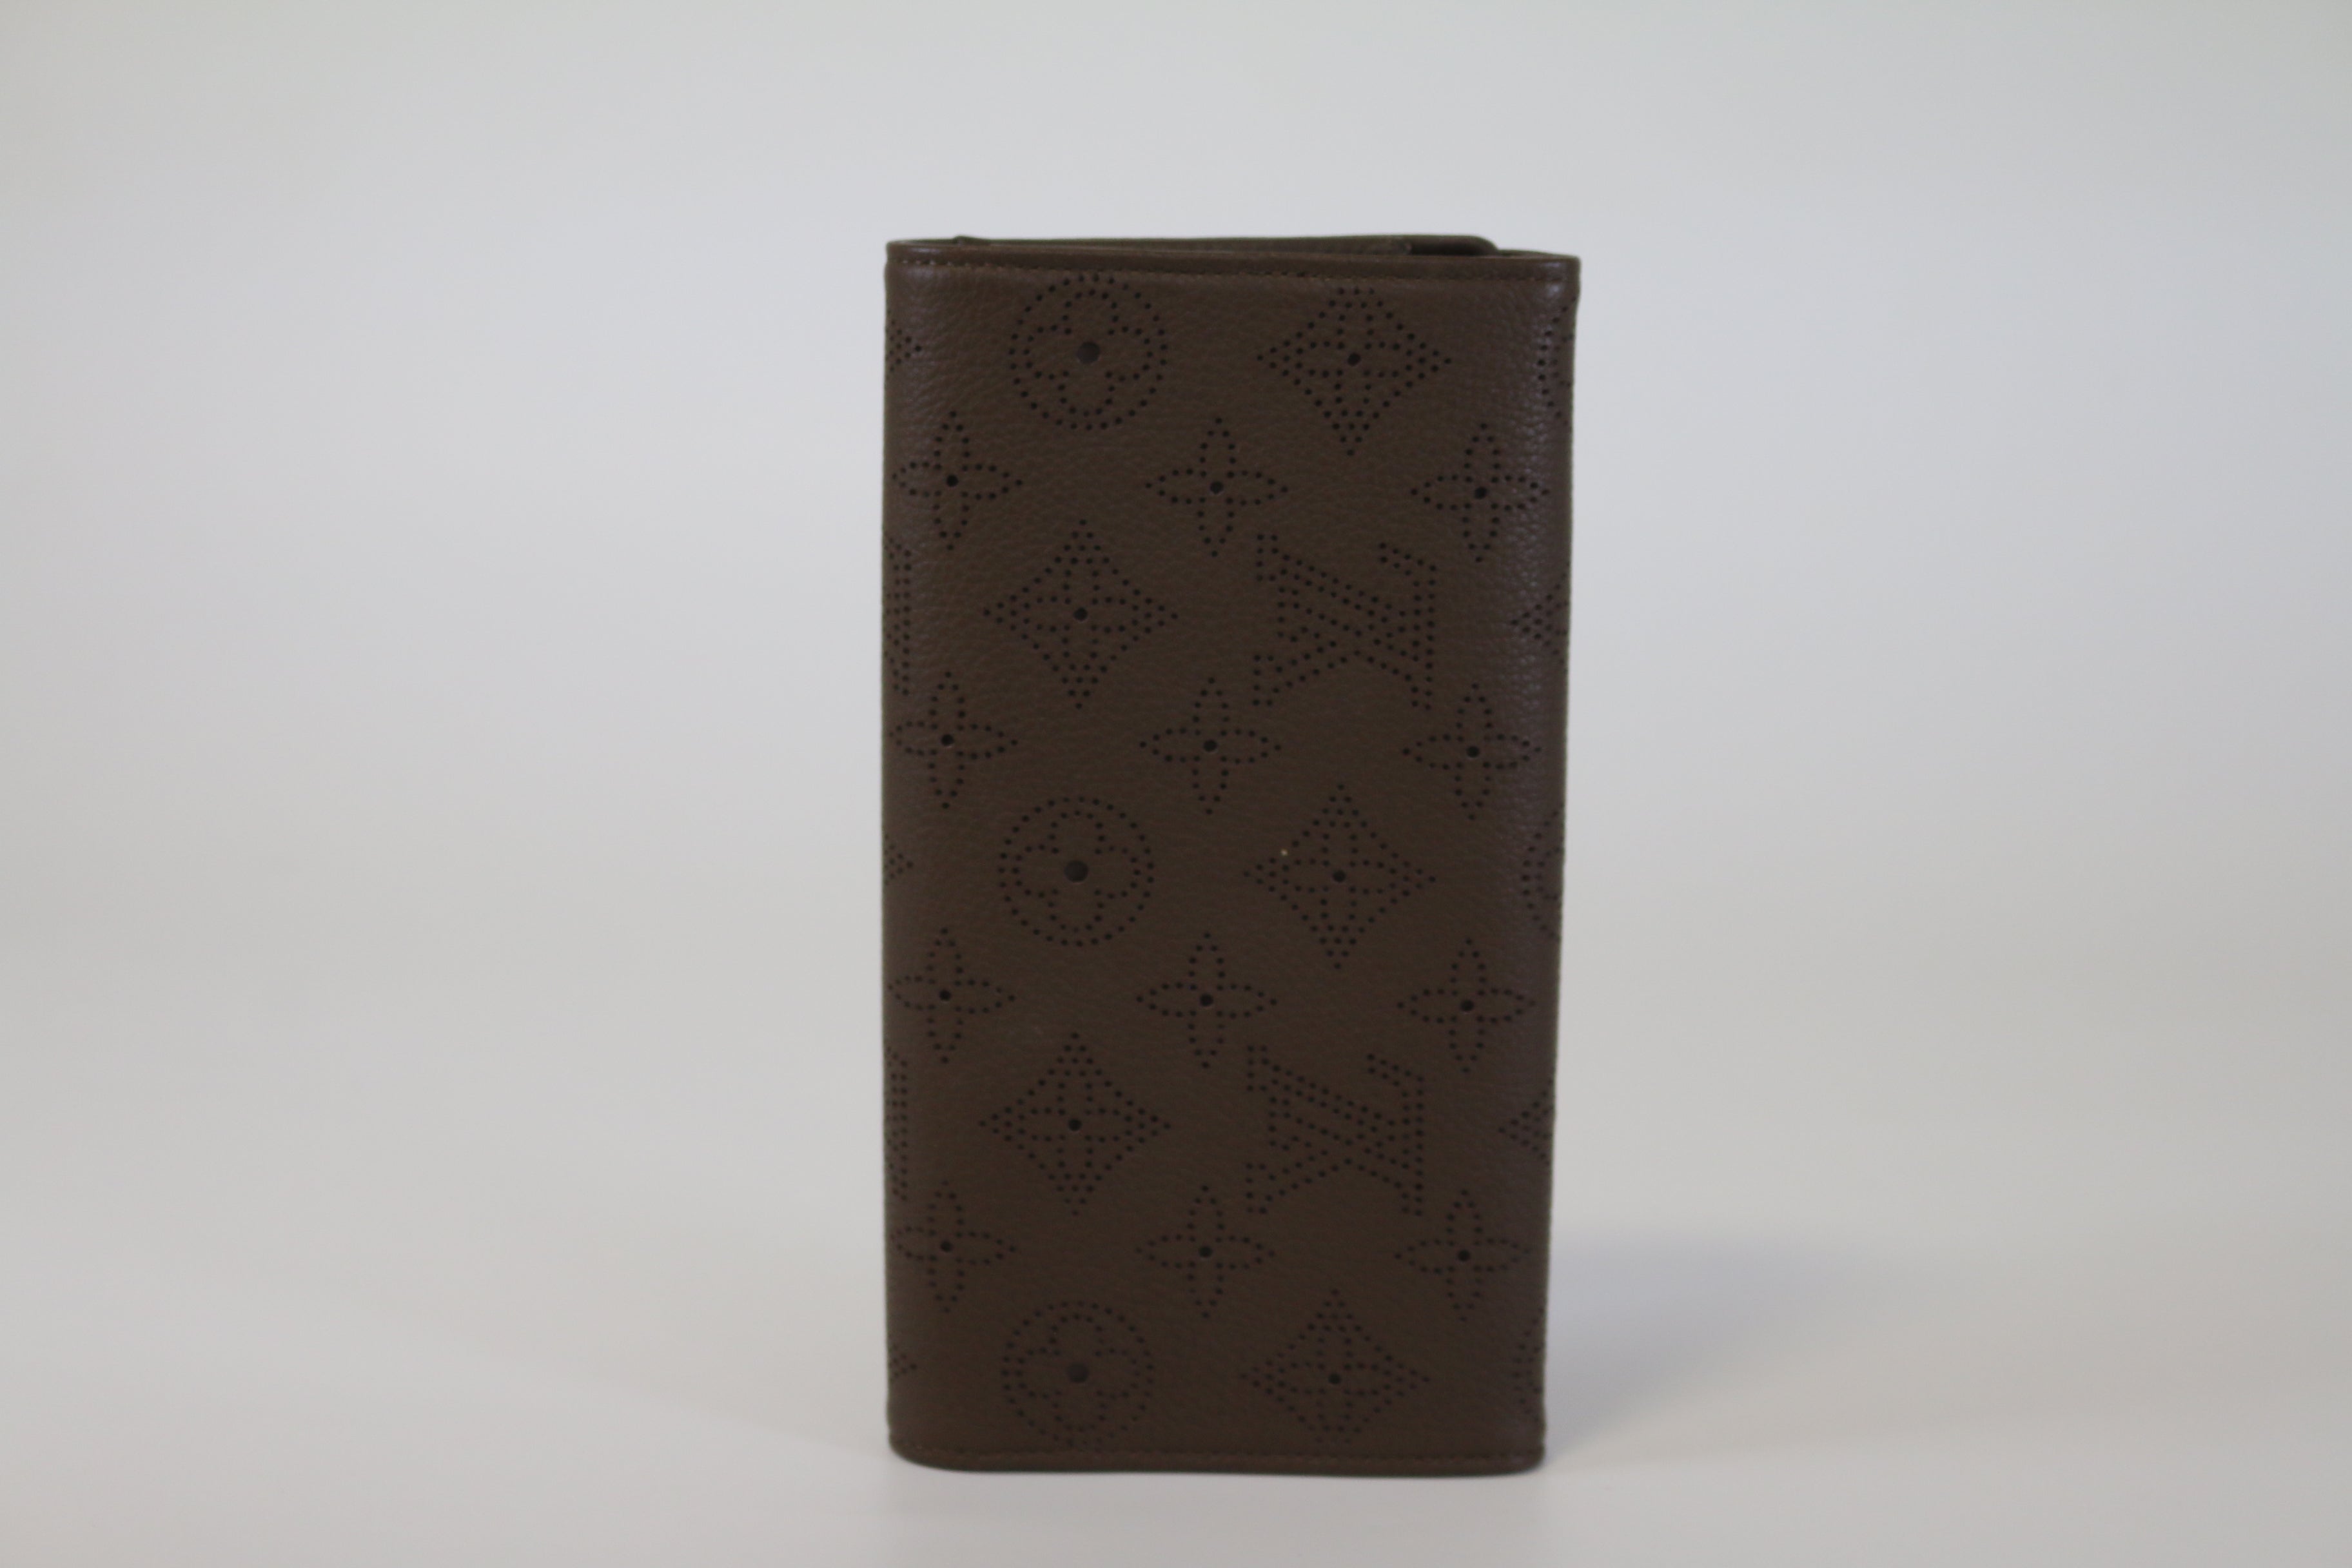 Authenticated Used Louis Vuitton Portefeuil Multiple Men's Bifold